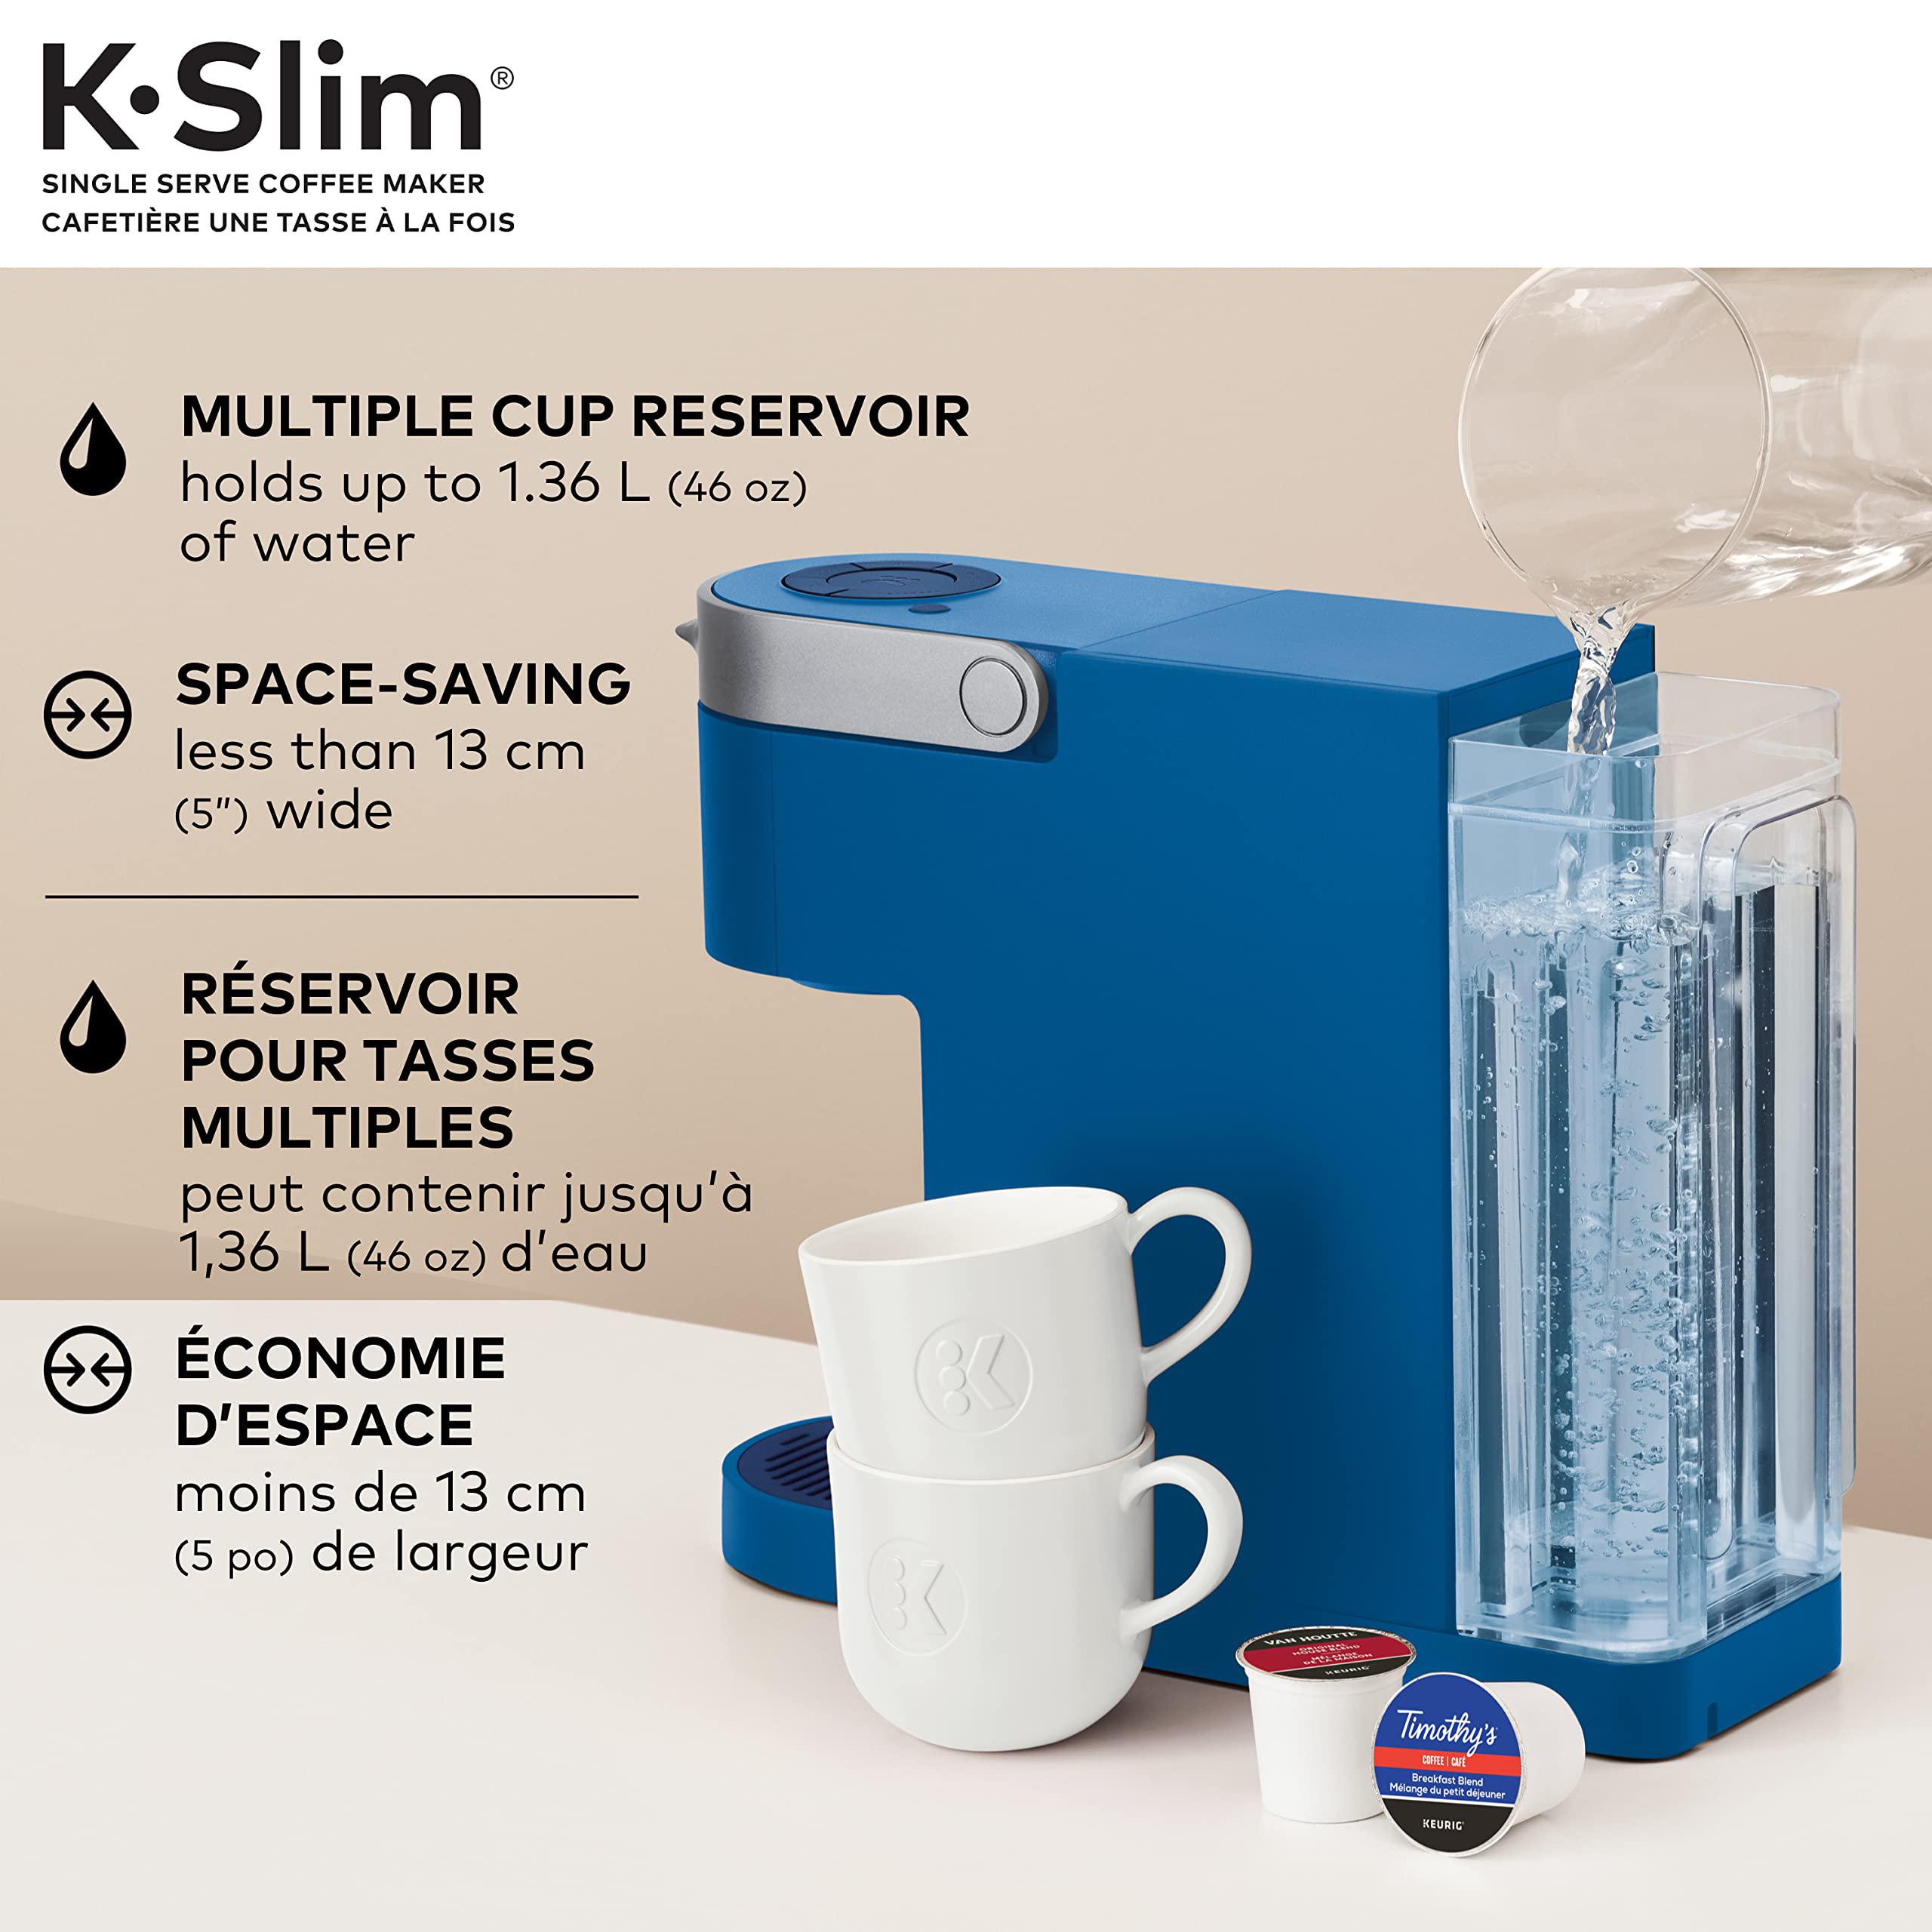 keurig k-slim single serve k-cup pod coffee maker, featuring simple push button controls and multistream technology, twilight